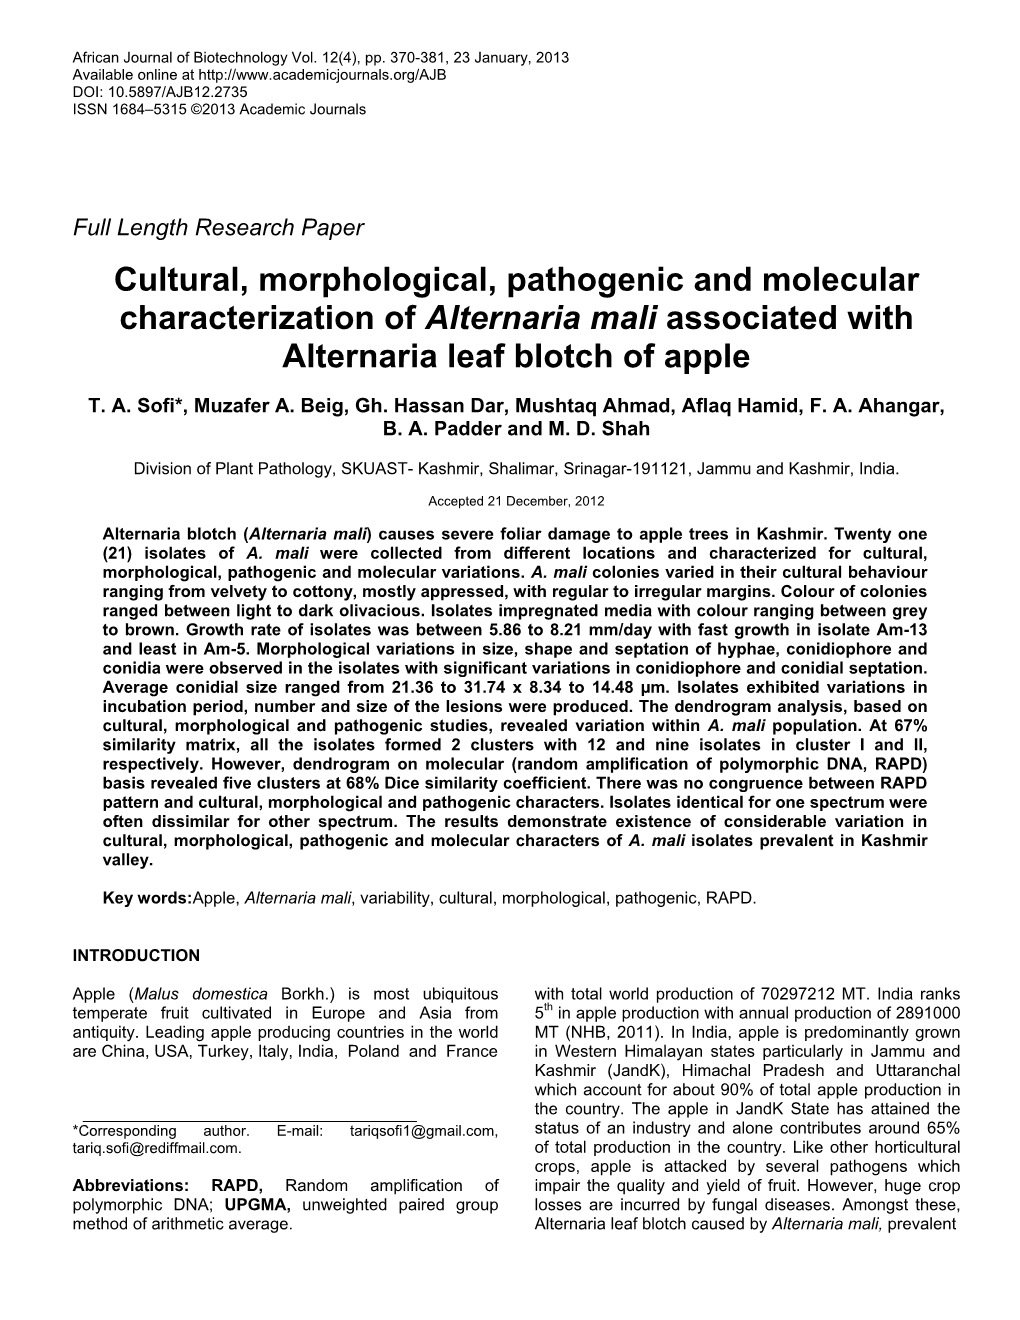 Cultural, Morphological, Pathogenic and Molecular Characterization of Alternaria Mali Associated with Alternaria Leaf Blotch of Apple